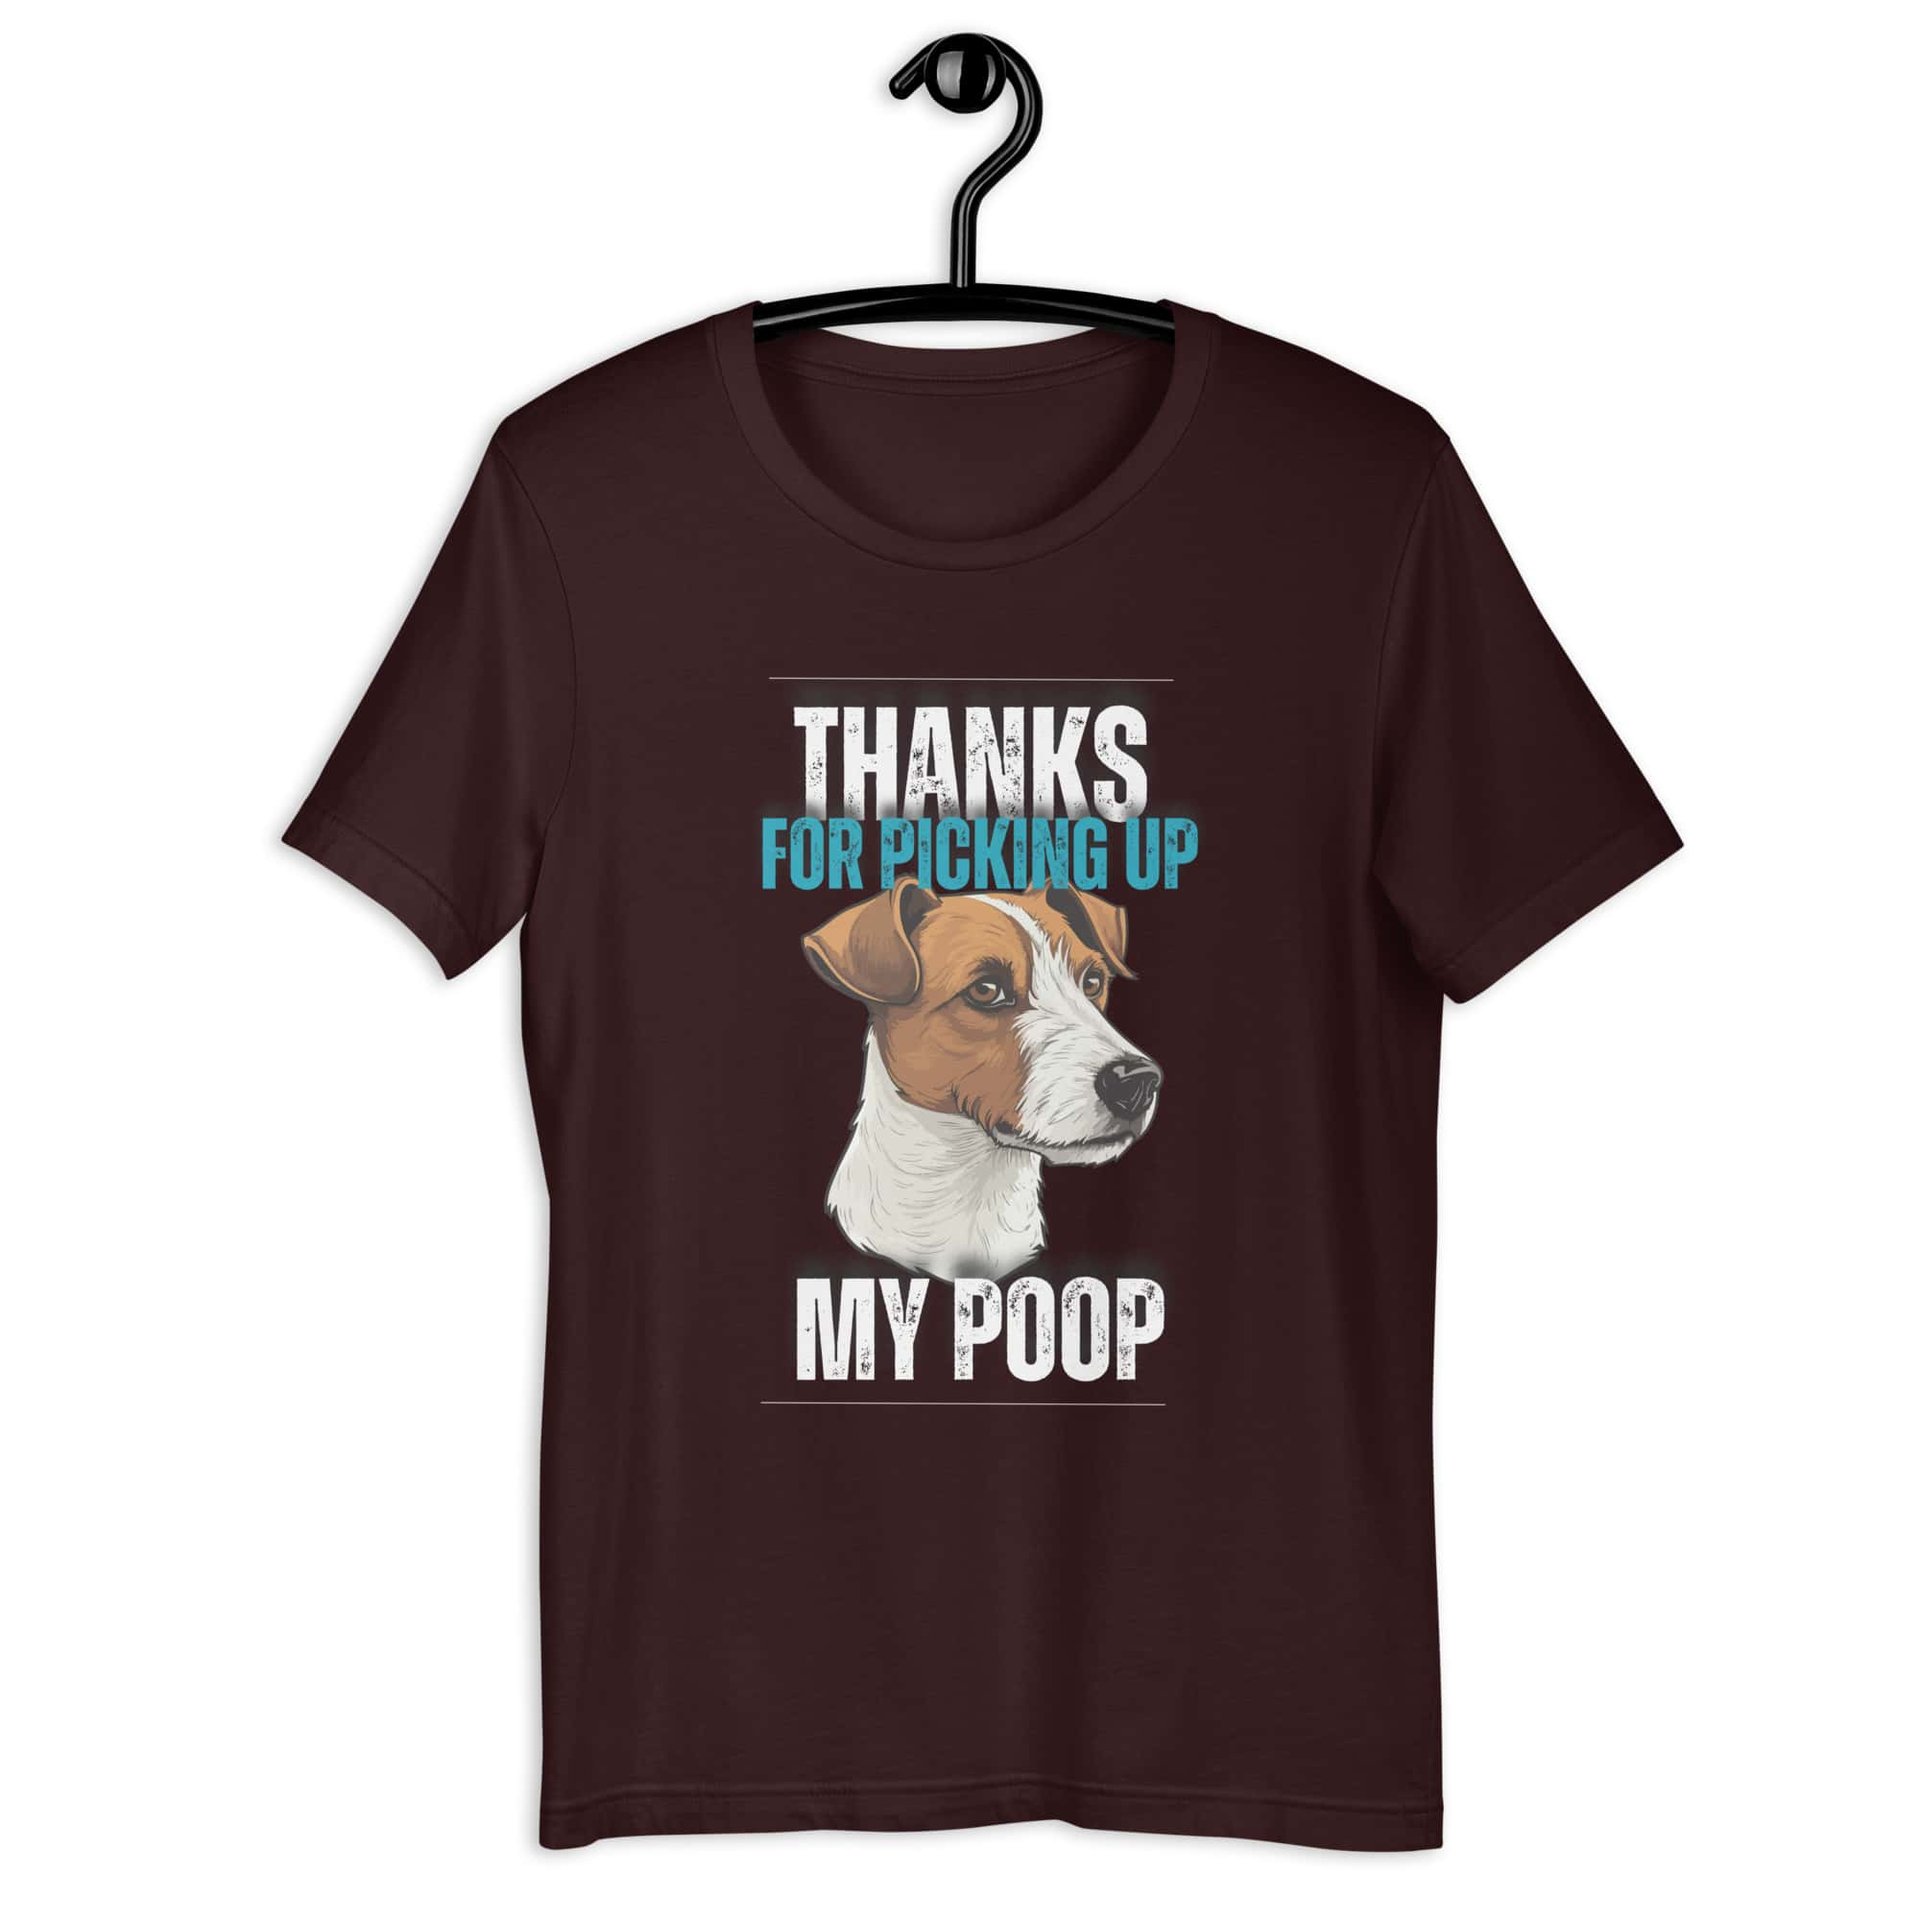 Thanks For Picking Up My POOP Funny Retrievers Unisex T-Shirt. Oxblood Black